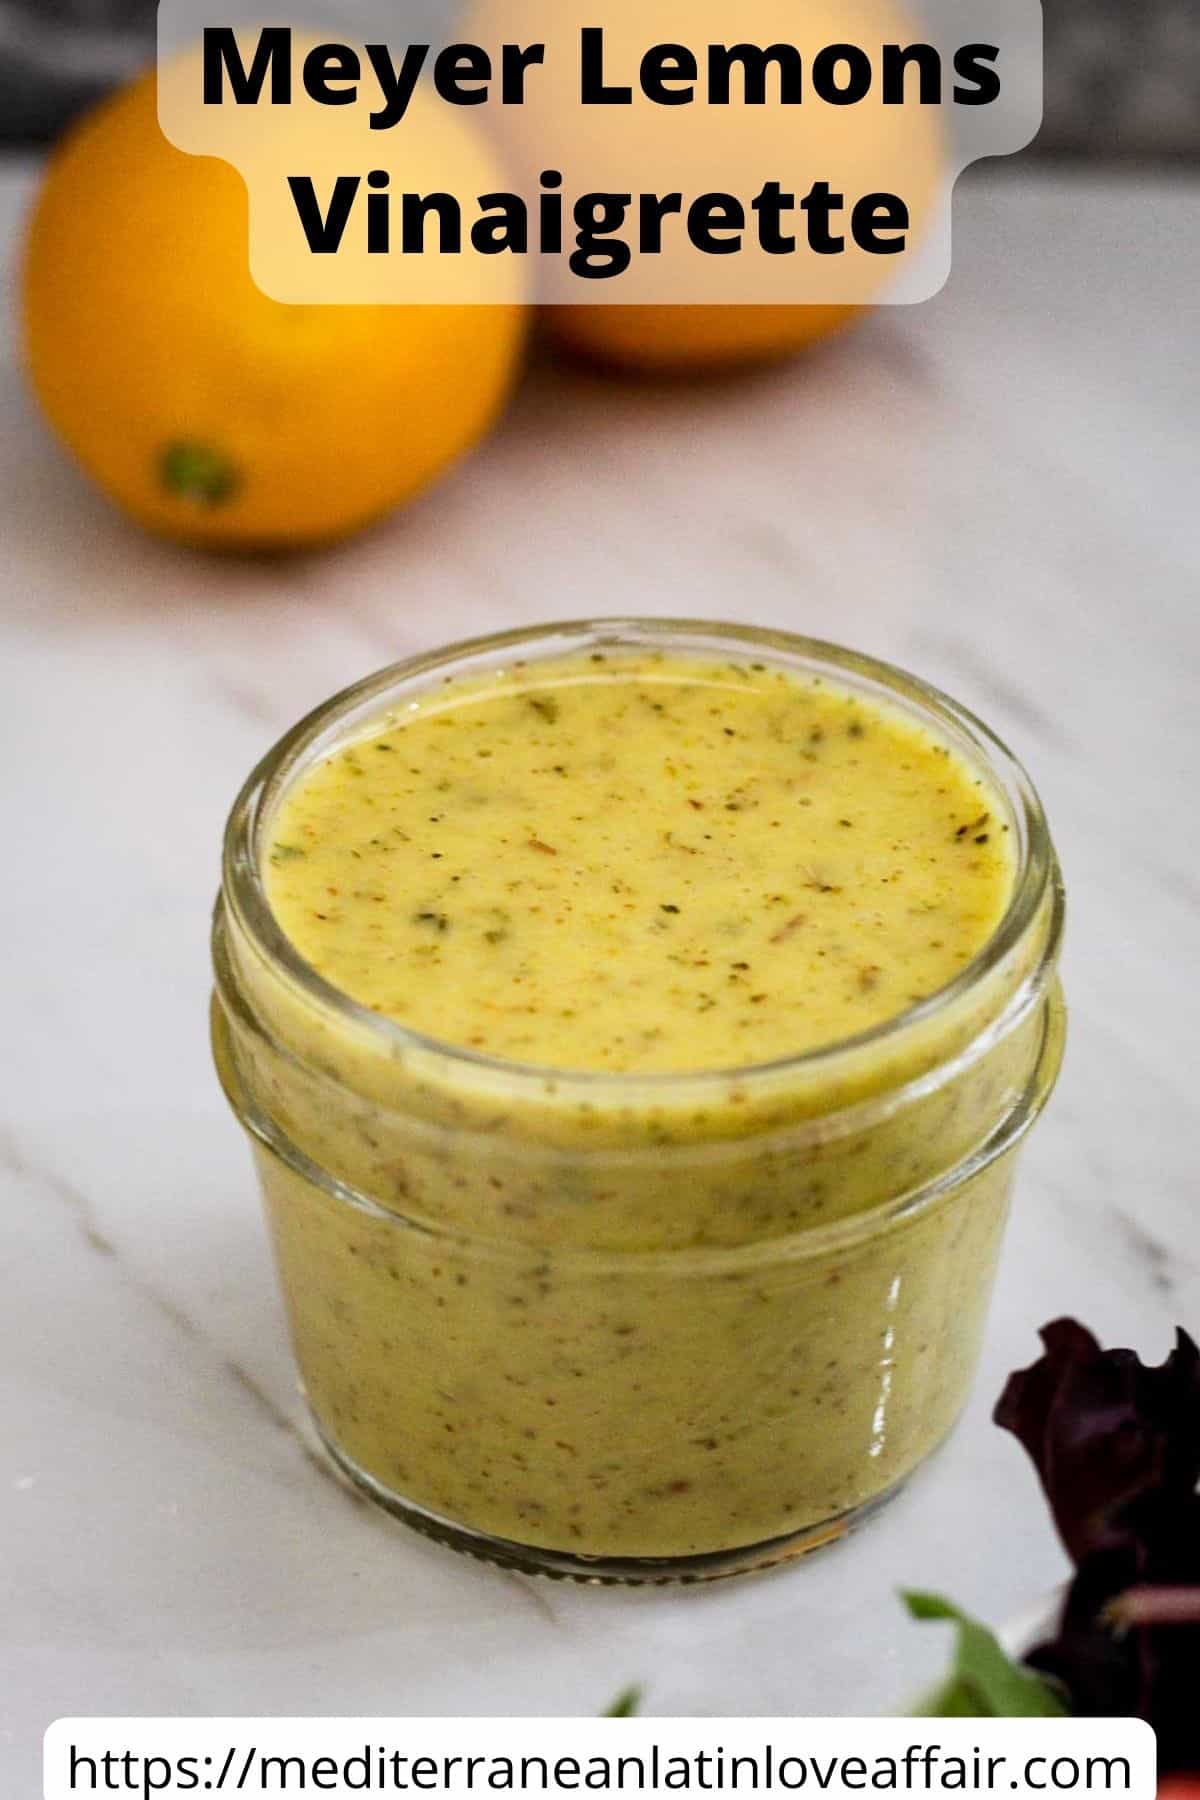 Best Meyer lemon vinaigrette - vinaigrette is in a small mason jar, ready to serve over a salad. There's a title bar over the picture and a website link at the bottom.